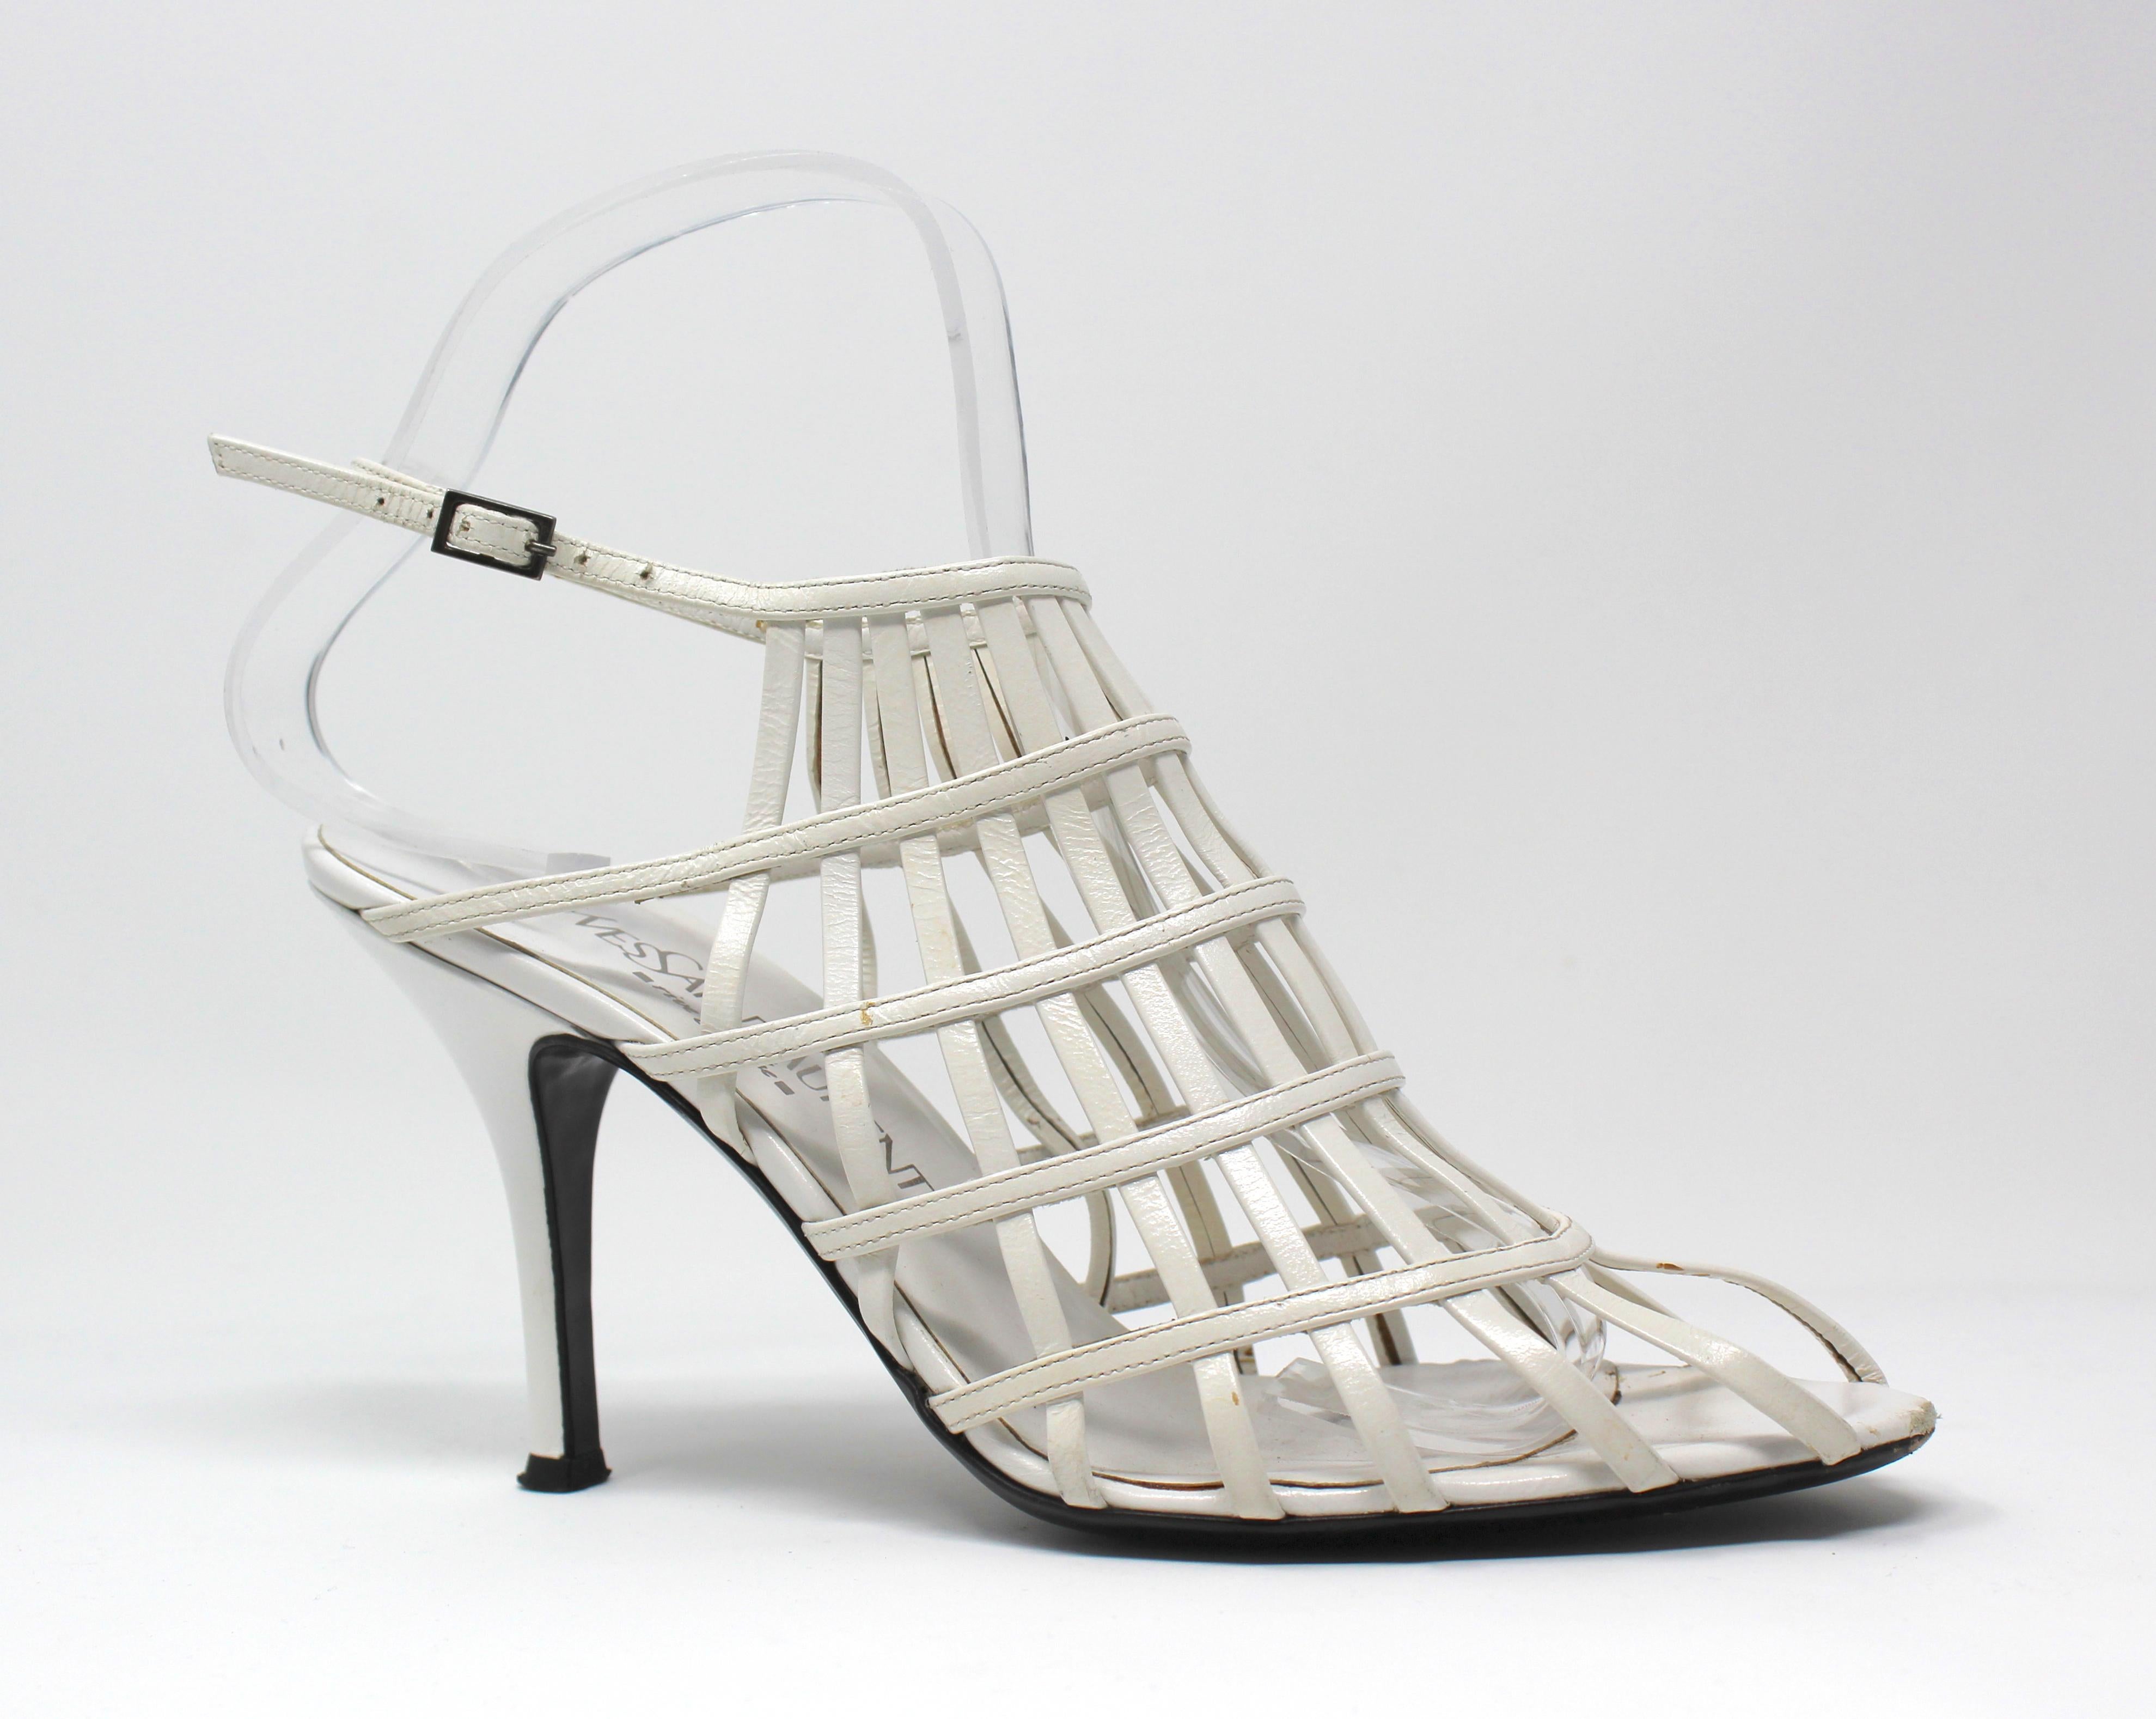 Yves Saint Laurent White Strappy Sandals 
-Gorgeous heels with peep-toe from YSL, 2000's
-Has cage like design, buckles in the back 
-Slim heel, all made in Italy, 100% leather
-Size 38 EU / 8 US

Condition:
-Great, inner sole is clean, bottom sole